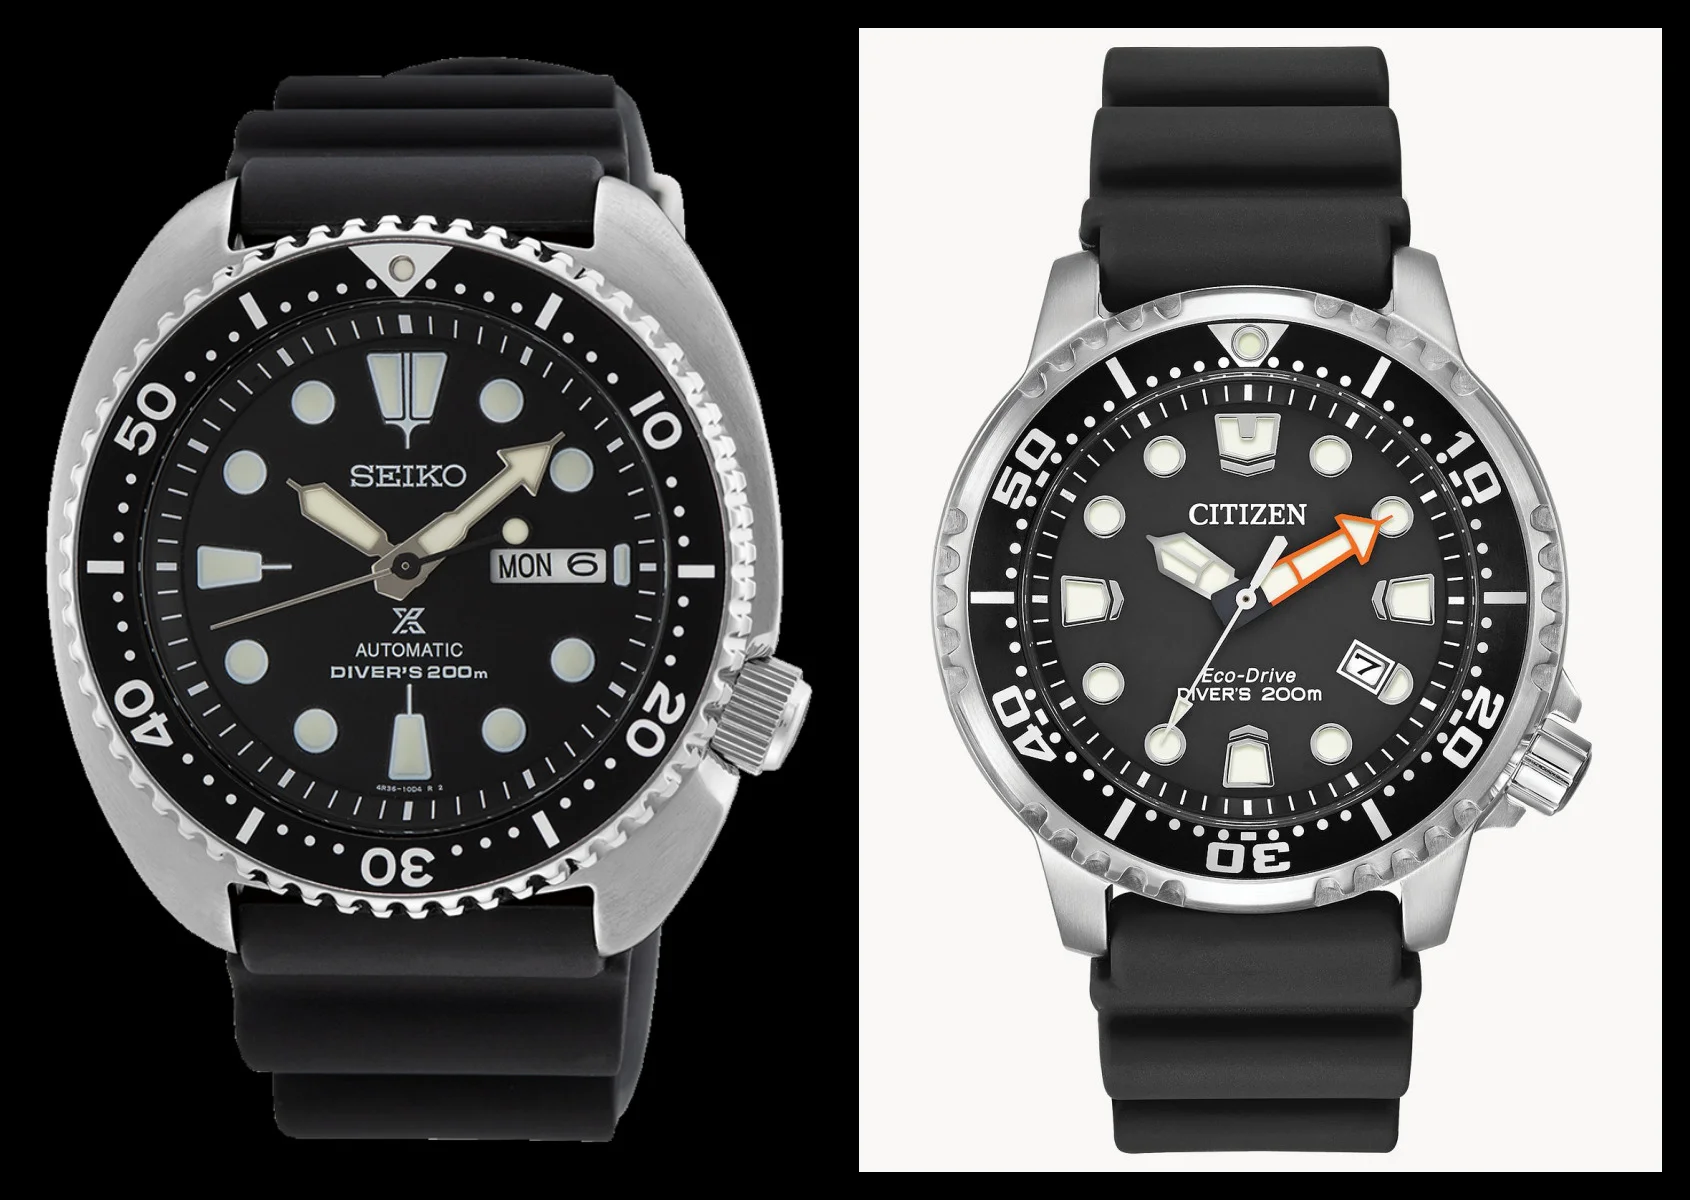 VERSUS: The Seiko Prospex Turtle takes the Citizen Promaster Dive for entry-level underwater supremacy - and Watches